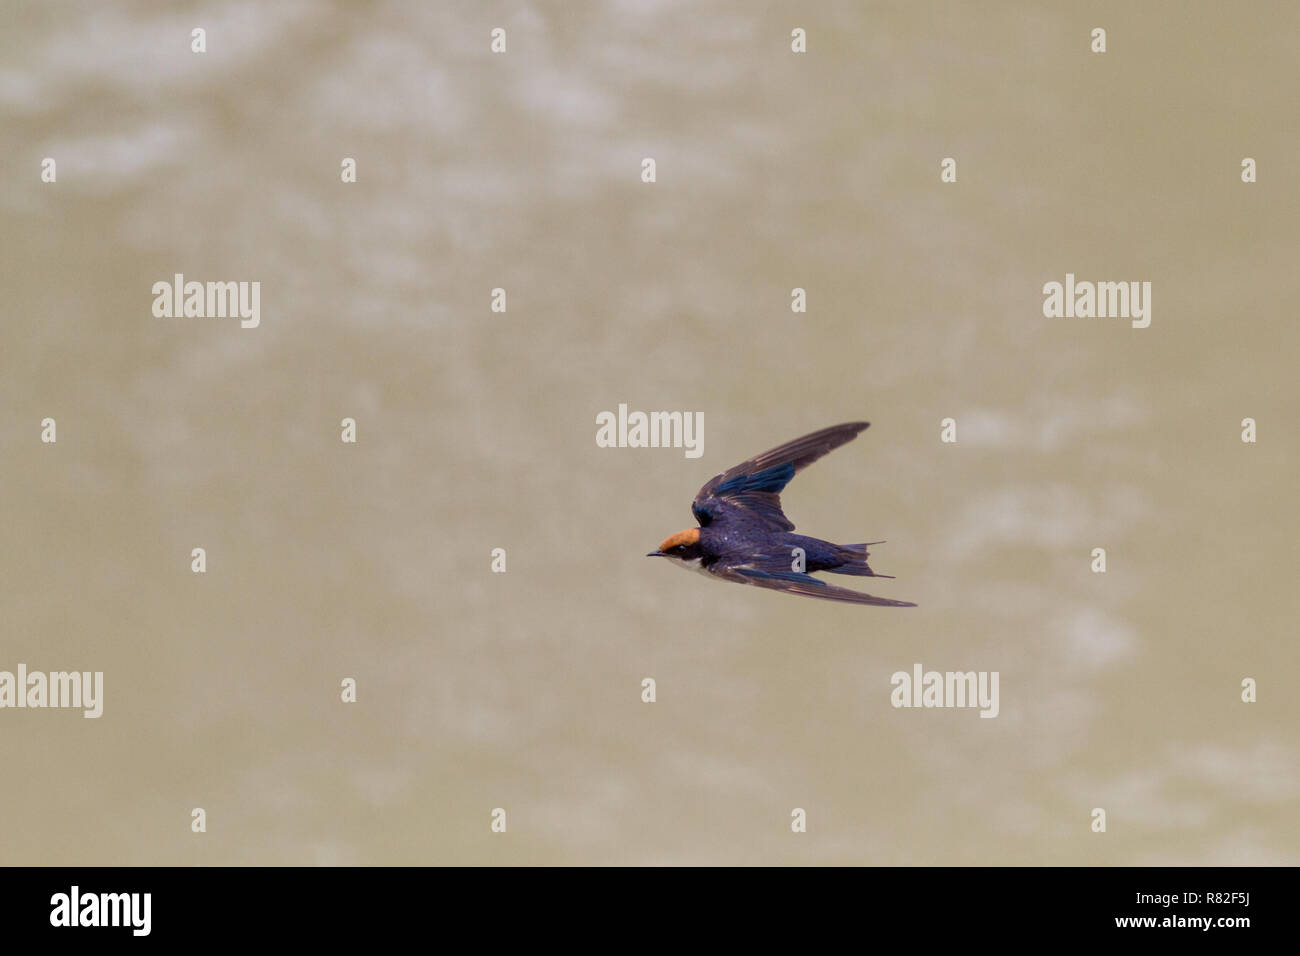 South Africa wildlife: Juvenile wire-tailed swallow in flight (Hirundo smithii) flying over water Stock Photo